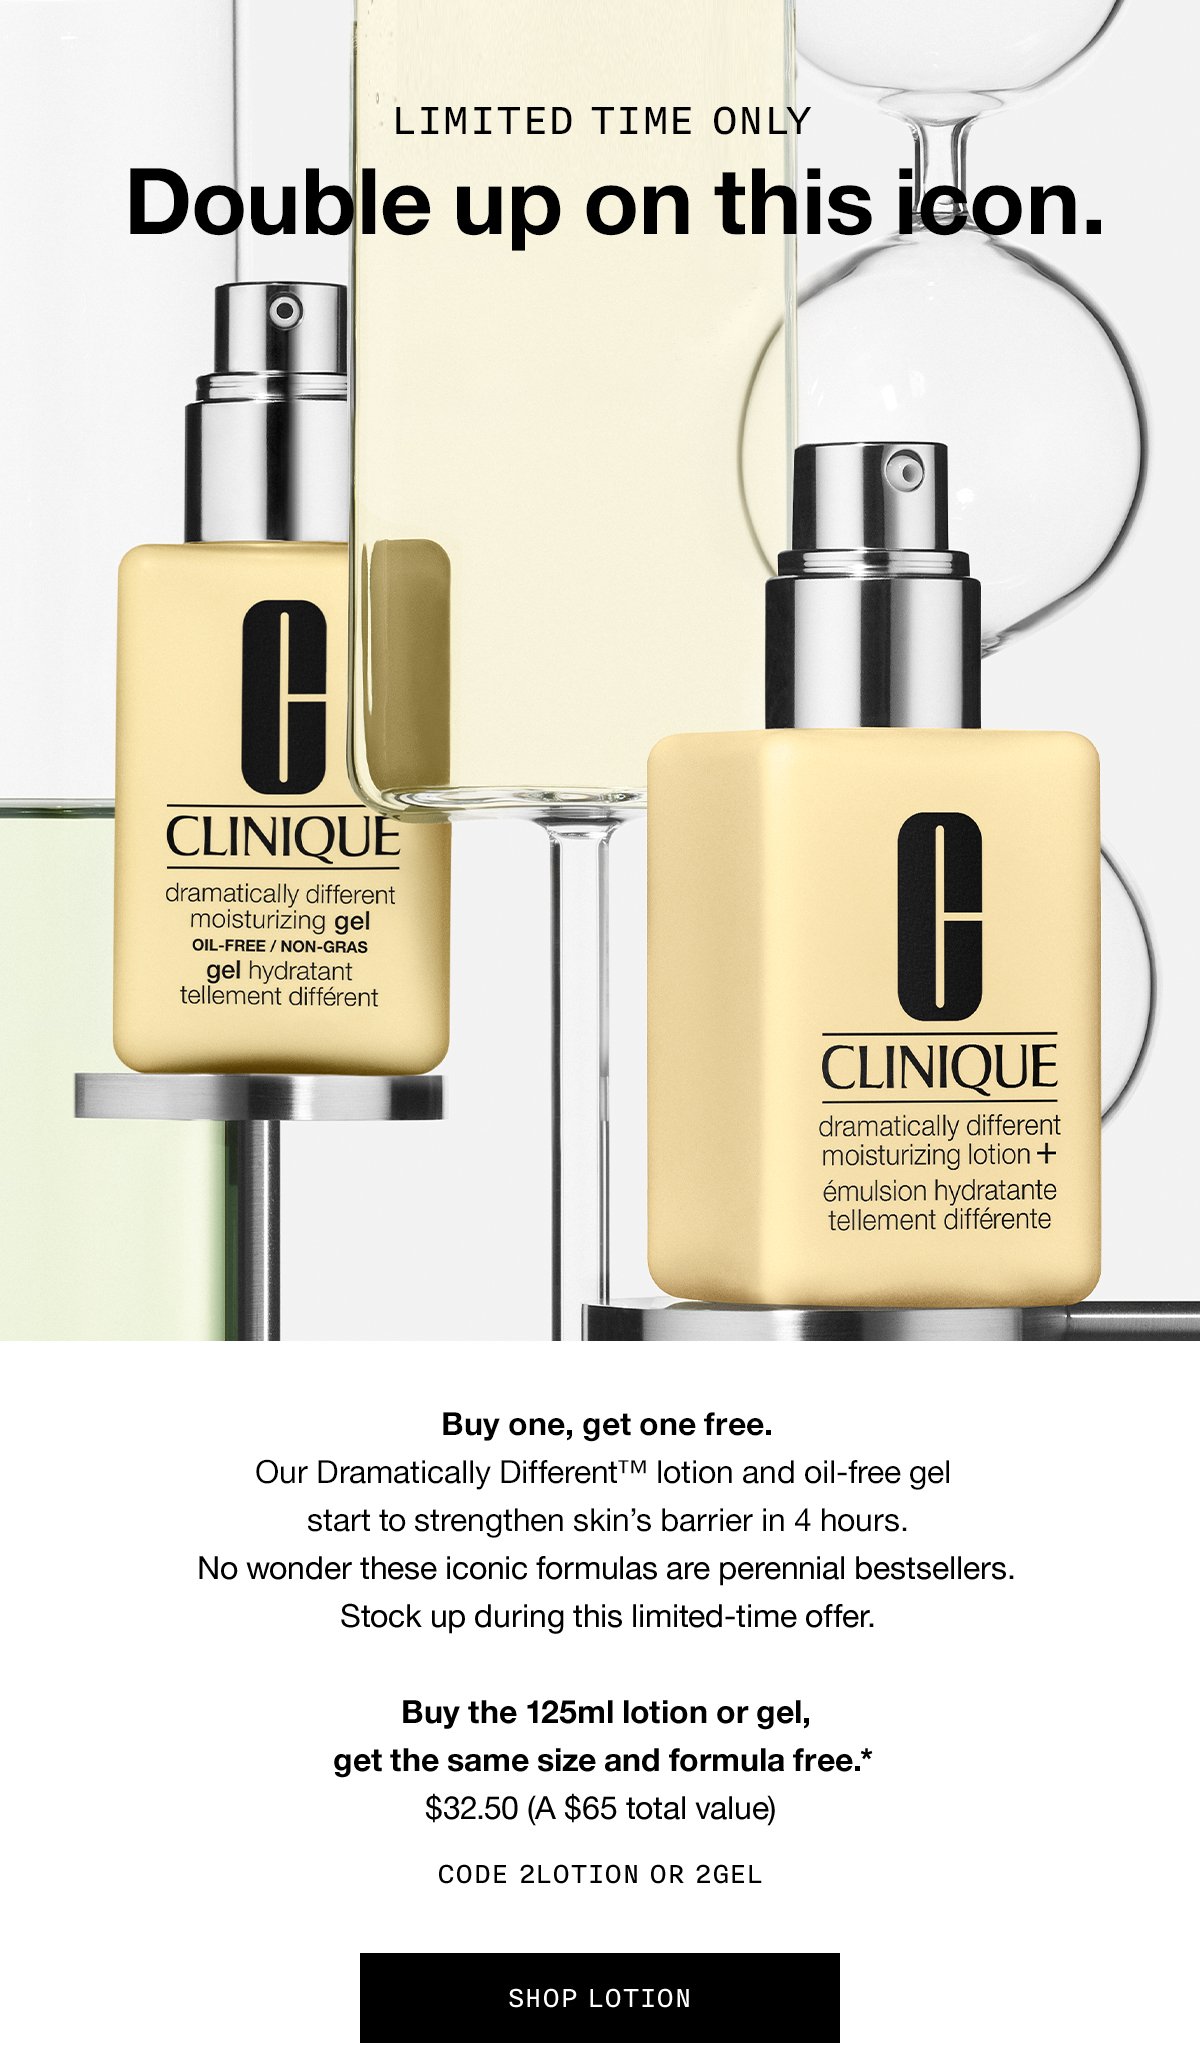 LIMITED TIME ONLY | Double up on this icon. Buy one, get one free. Our Dramatically Different™ lotion and oil-free gel start to strengthen skin's barrier in 4 hours. No wonder these iconic formulas are perennial bestsellers. Stock up during this limited-time offer. Buy the 125ml lotion or gel, get the same size and formula free.* $32.50 (A $65 total value) CODE 2LOTION OR 2GEL SHOP LOTION